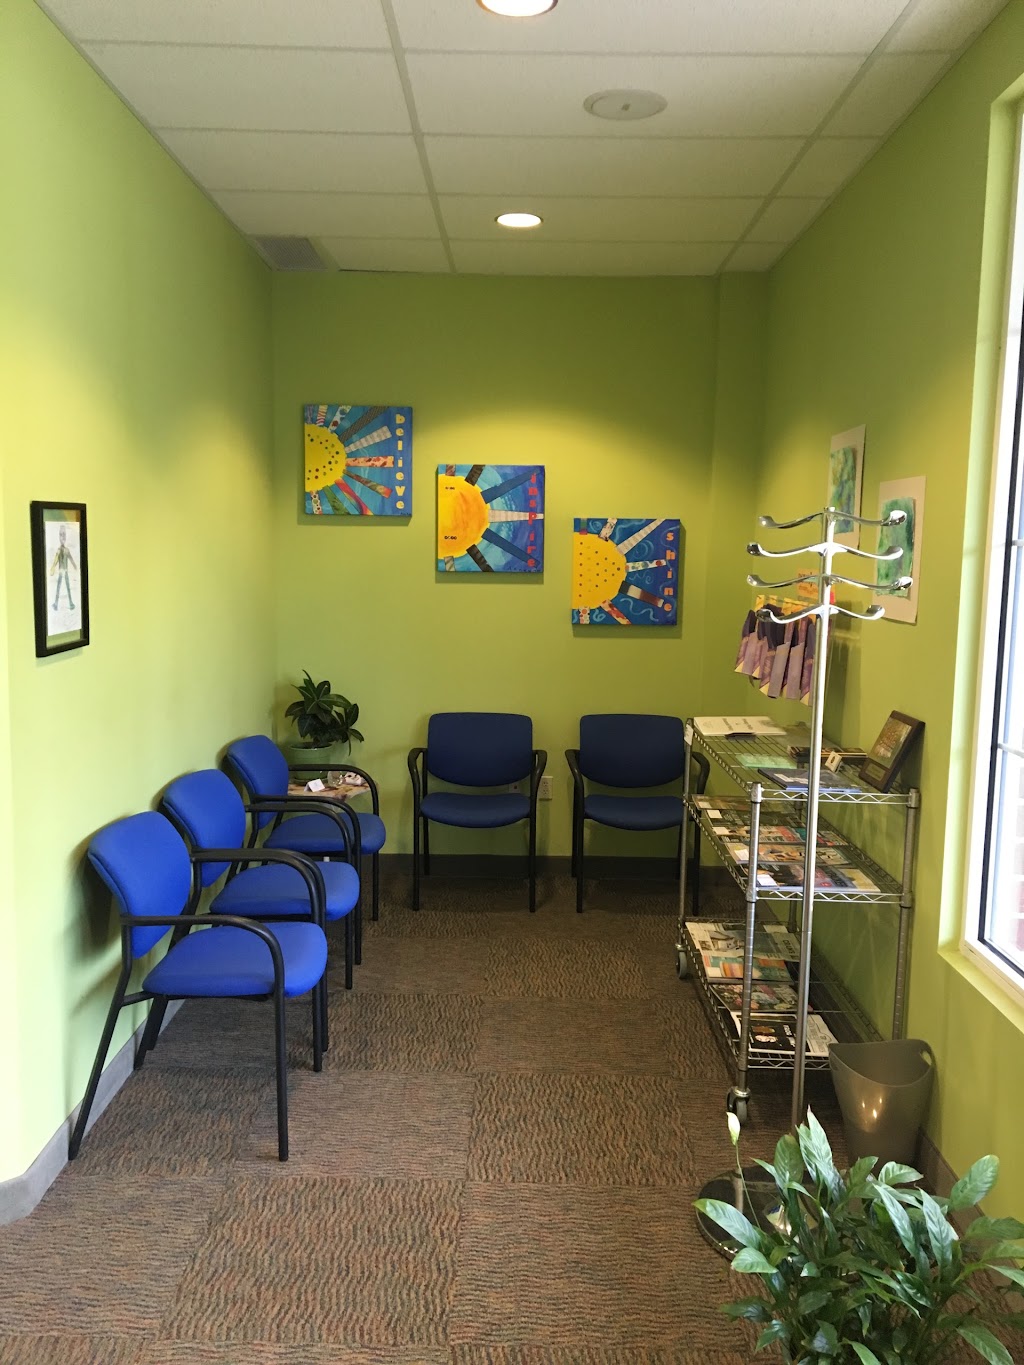 Activ Physical Therapy | 3667 Brecksville Rd, Richfield, OH 44286 | Phone: (330) 659-4050